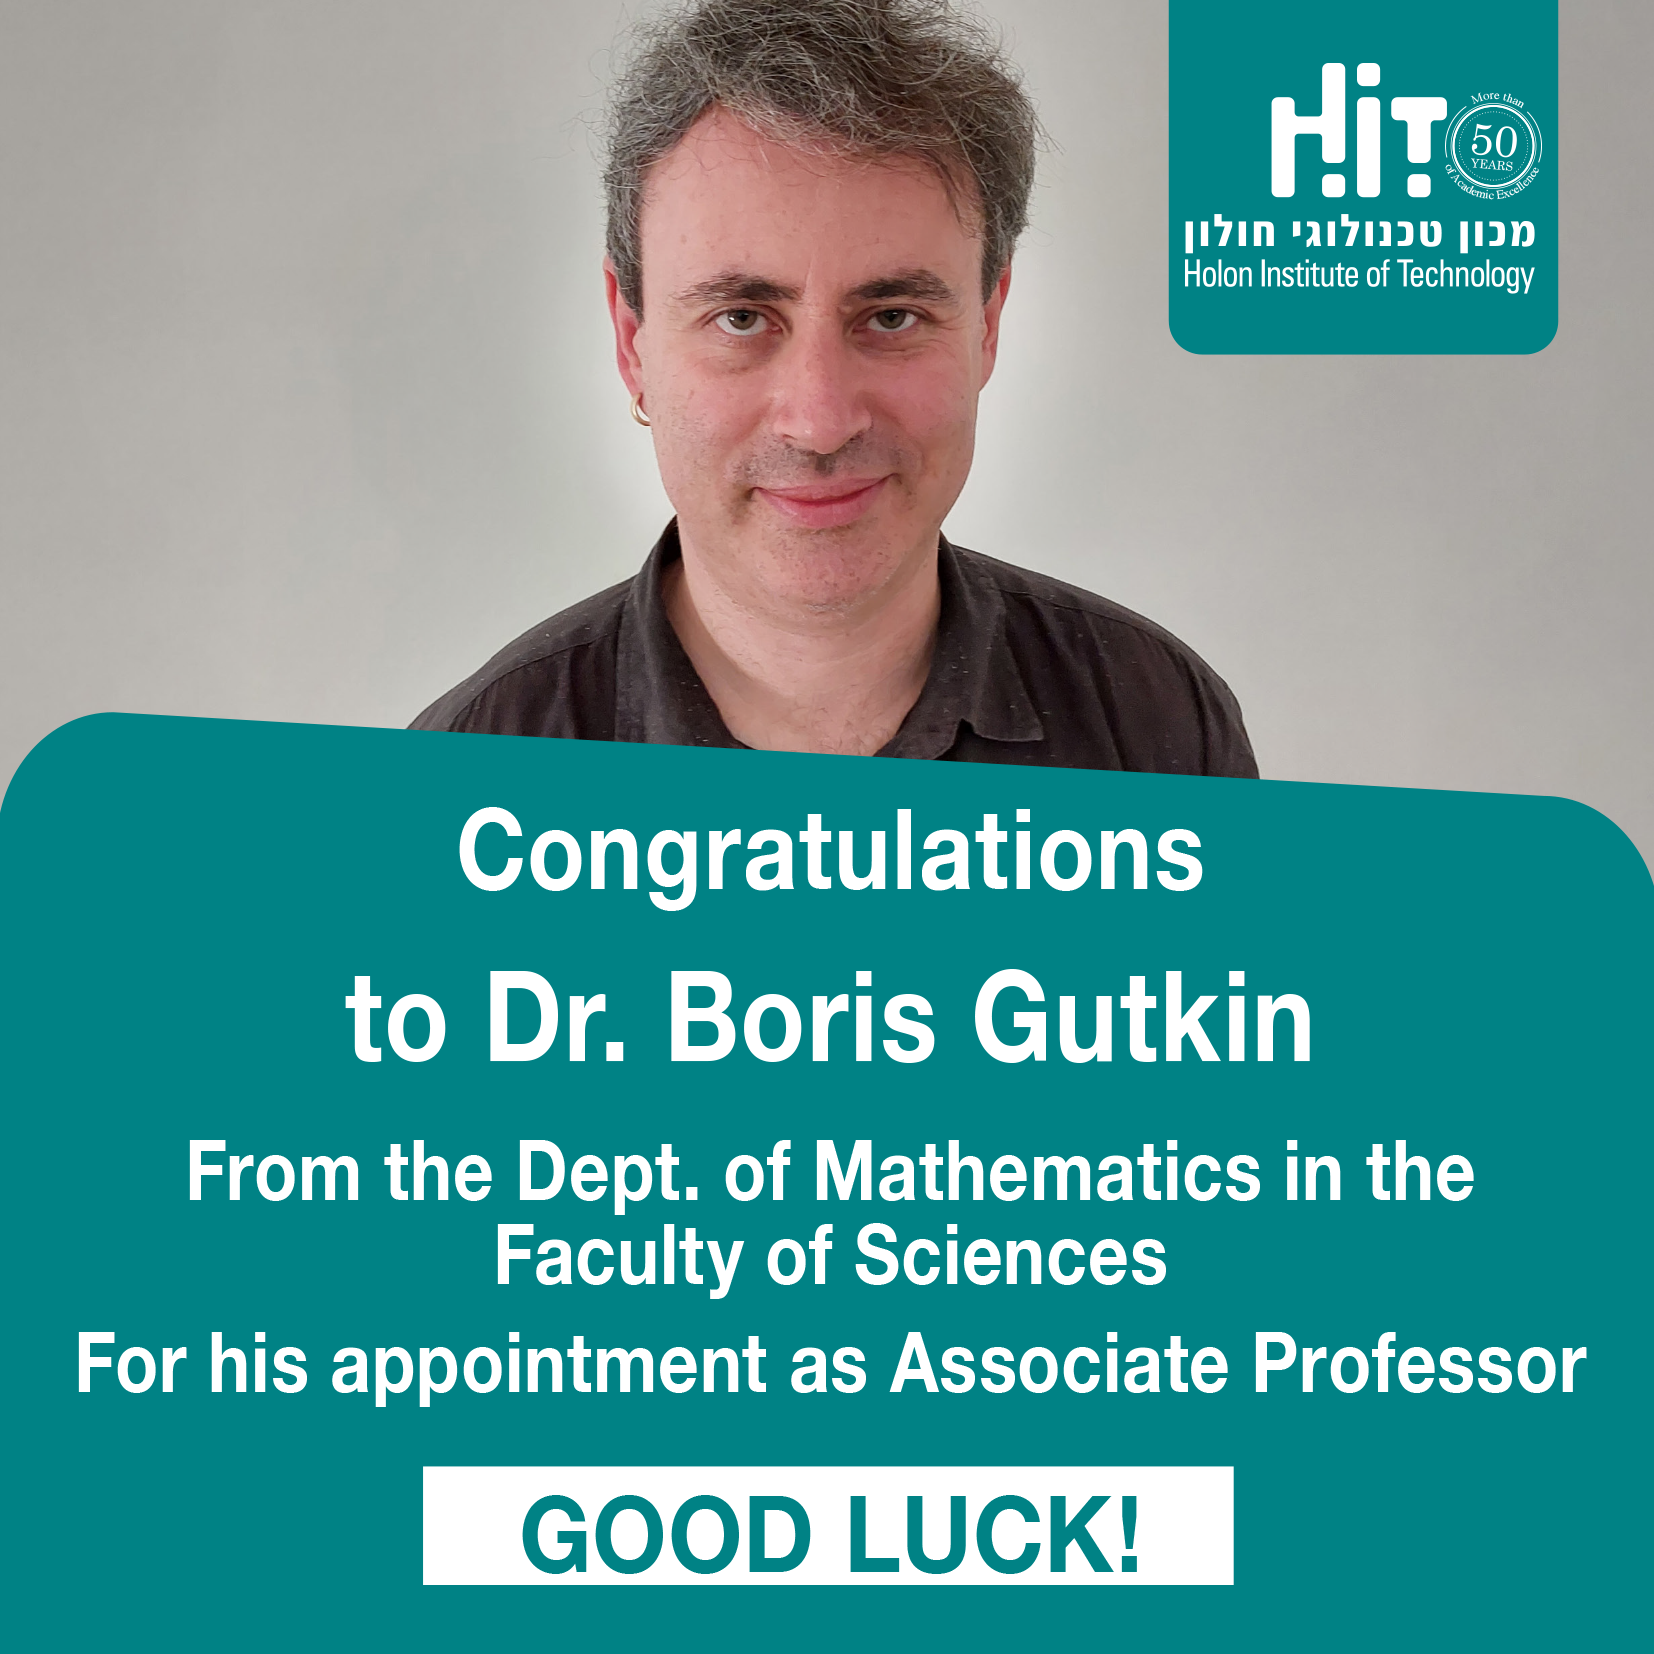 Congratulations to Dr. Boris Gutkin From the Dept. of Mathematics in the Faculty of Sciences For his appointment as Associate Professor